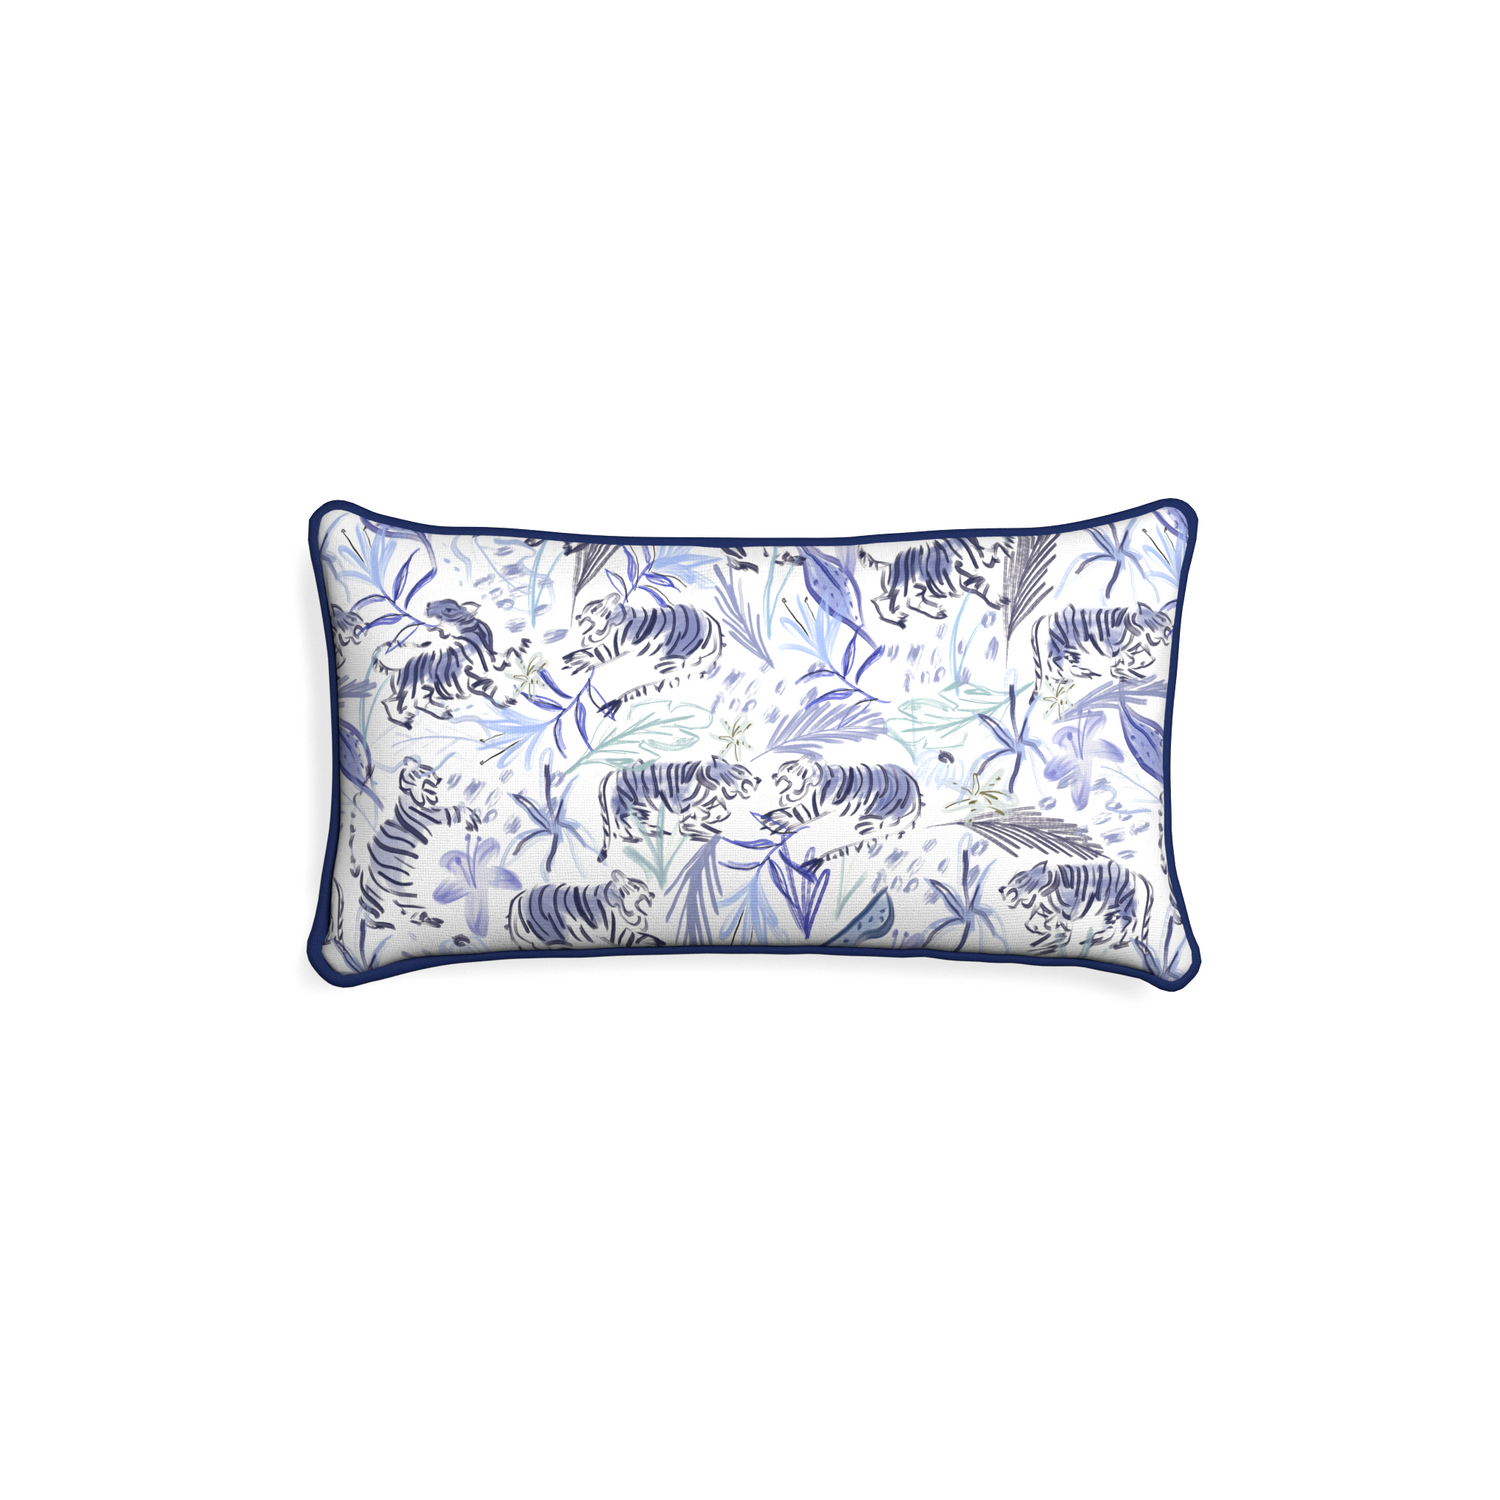 Petite-lumbar frida blue custom blue with intricate tiger designpillow with midnight piping on white background